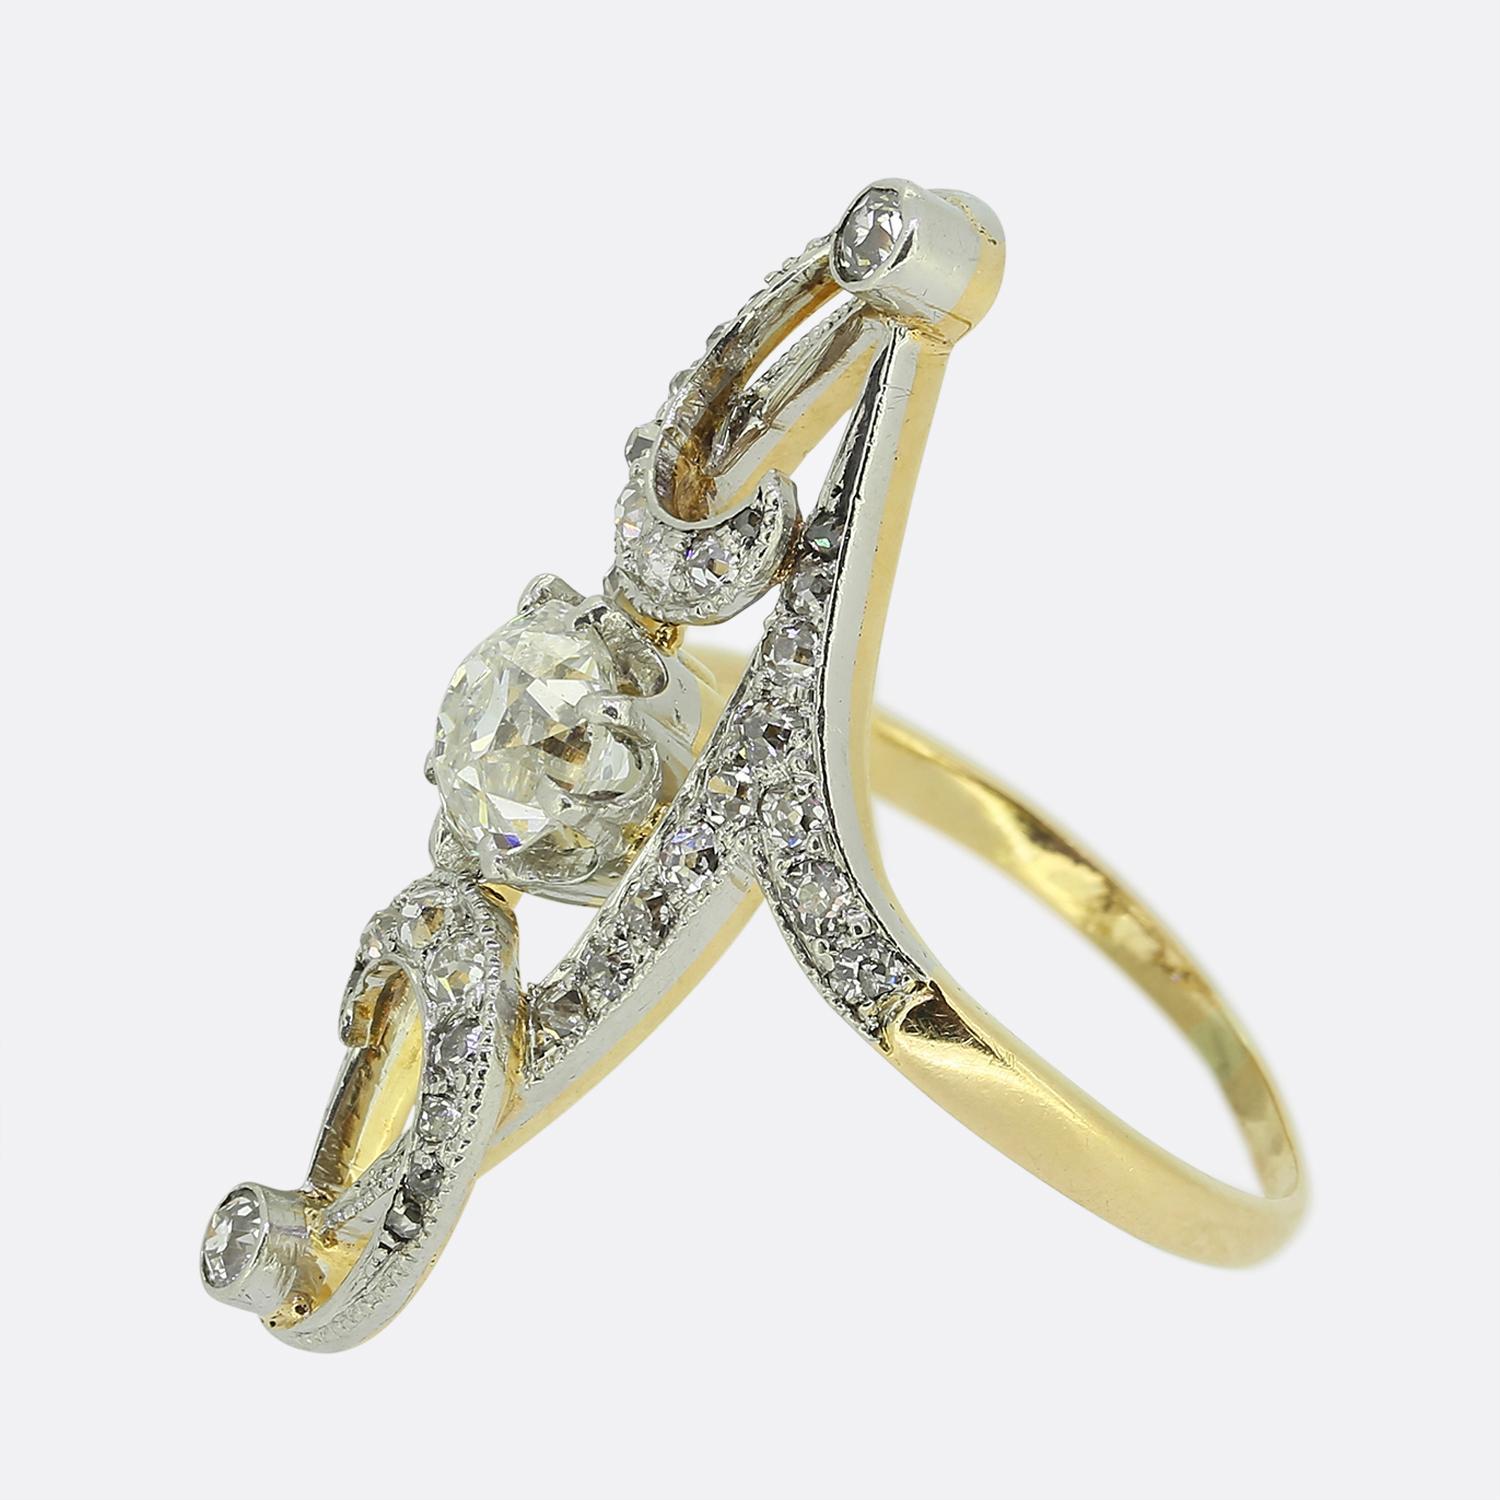 Here we have a charming navette ring dating back to the Edwardian period. This elegant piece showcases a single old mine cut diamond at the centre of the face in an eight clawed setting. This principal stone is surrounded by a curvaceous open frame